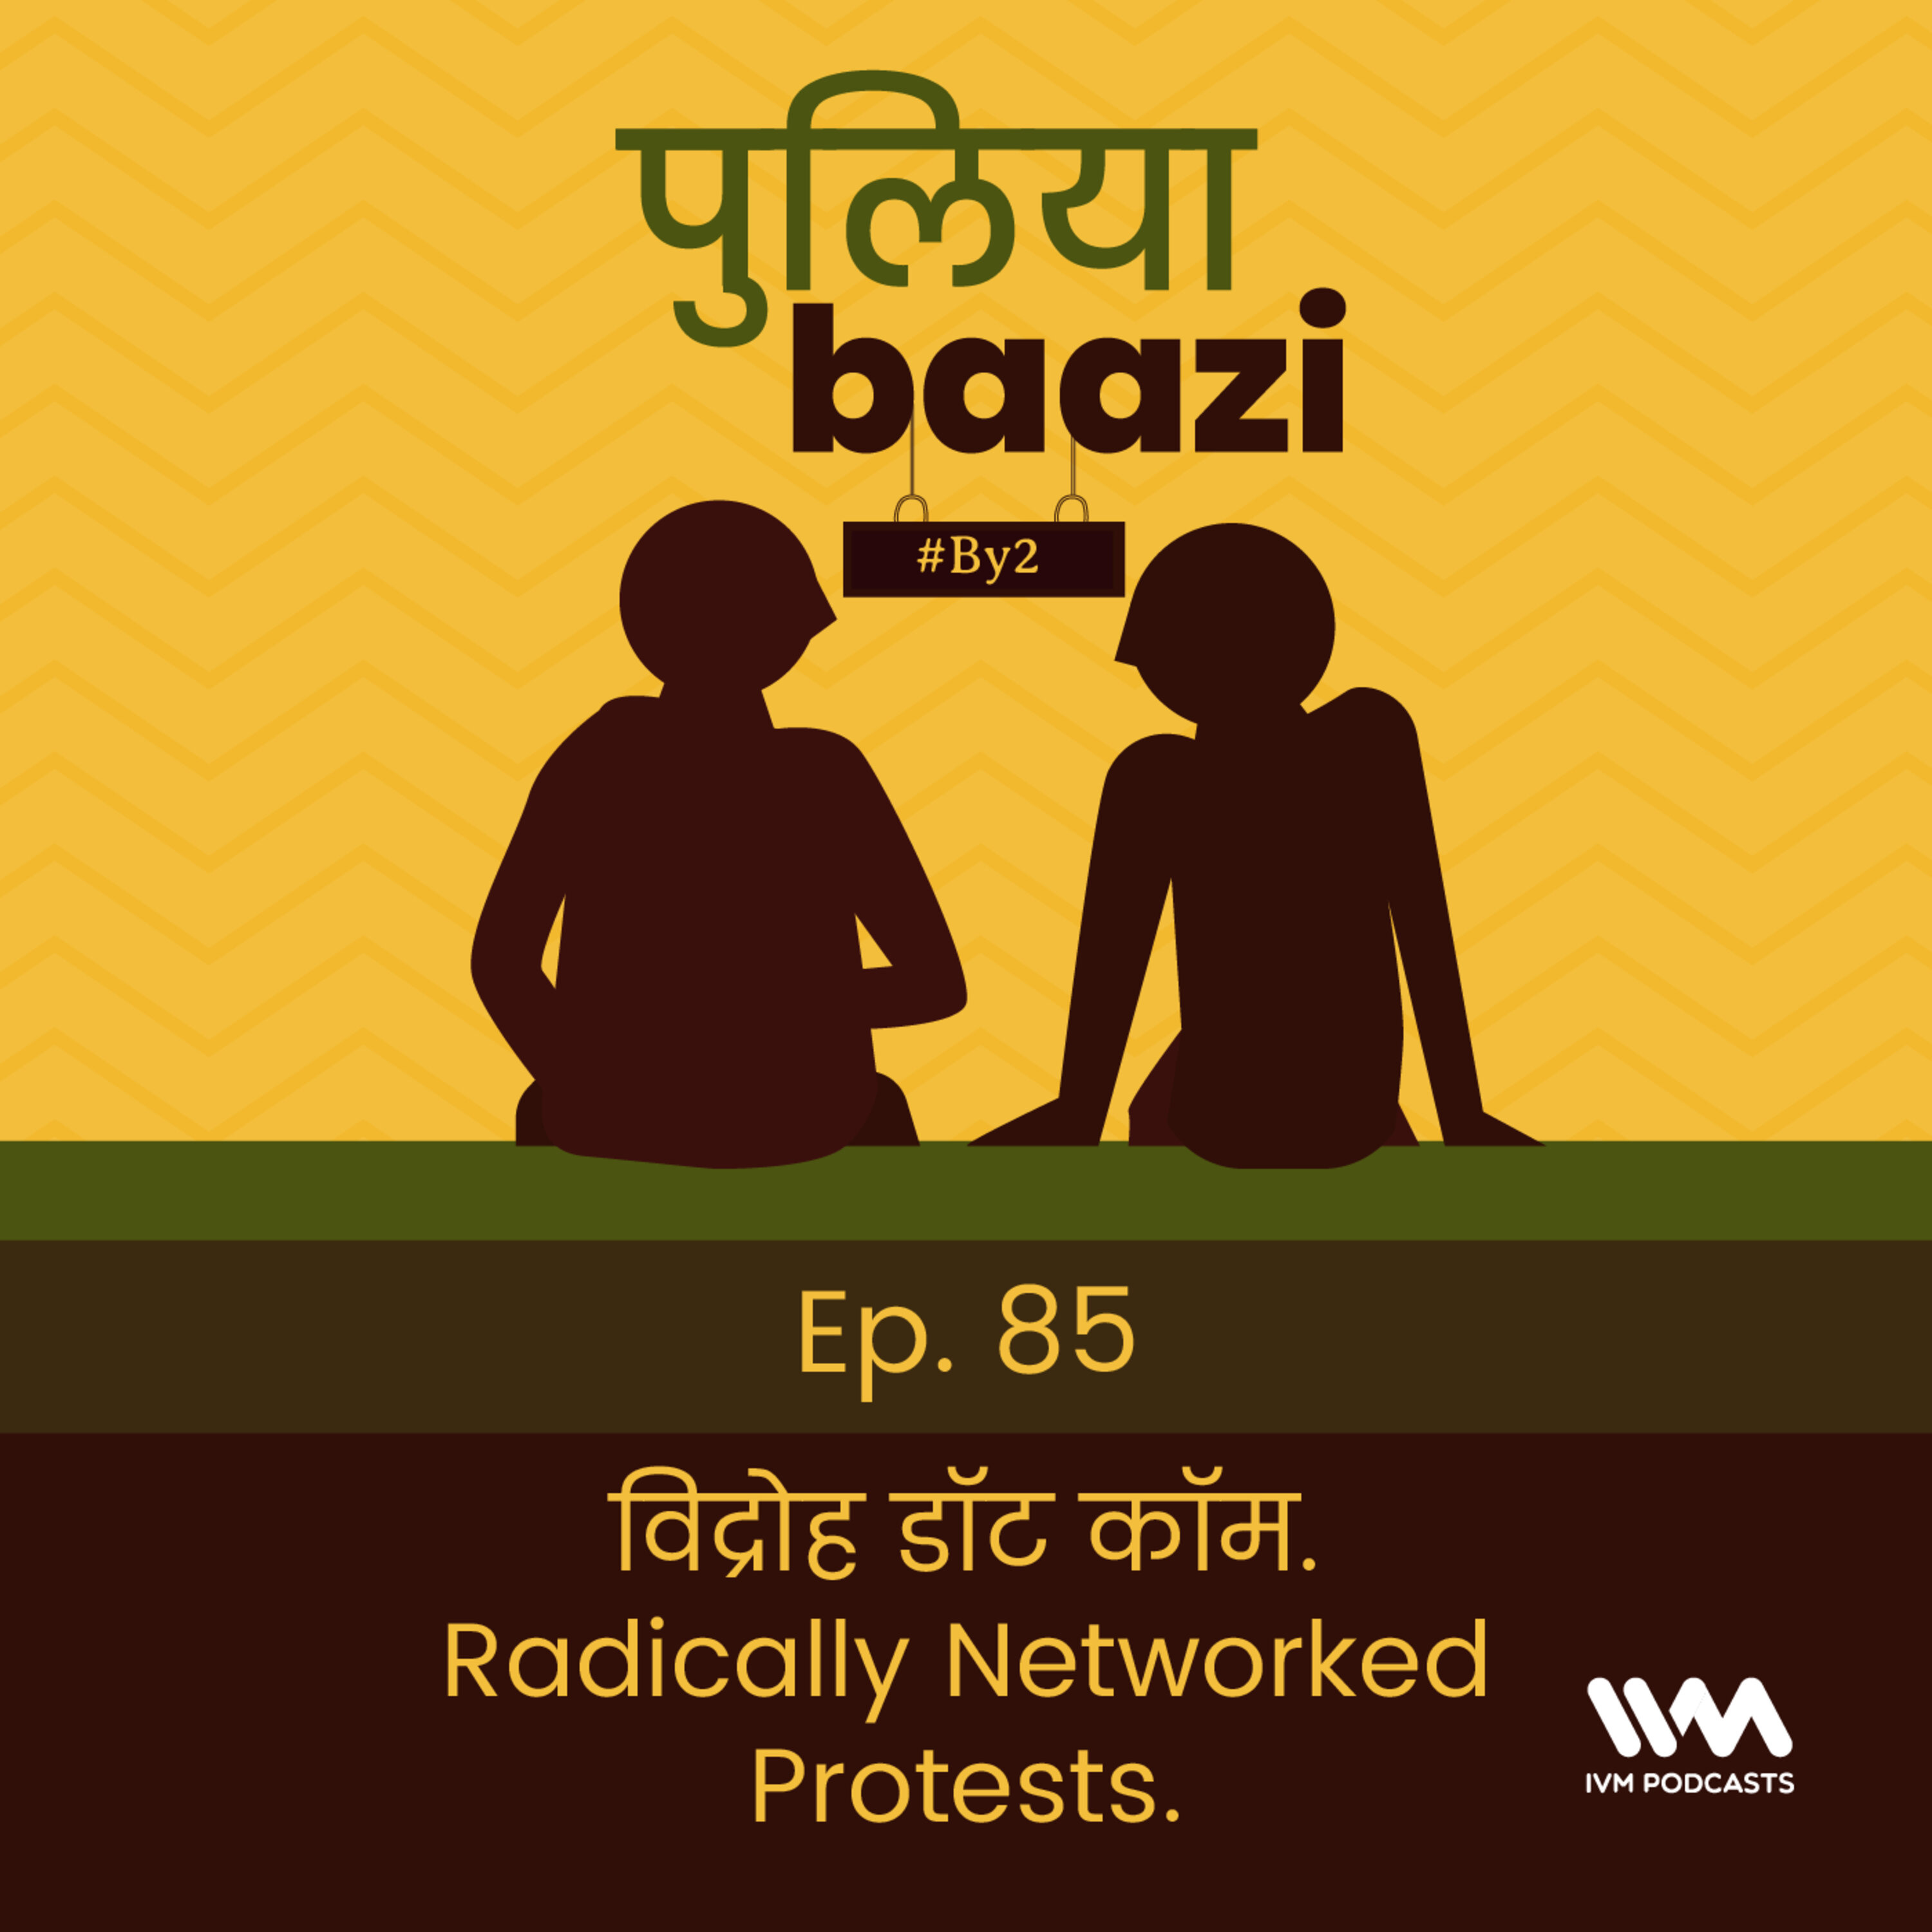 विद्रोह डॉट कॉम. Radically Networked Protests.